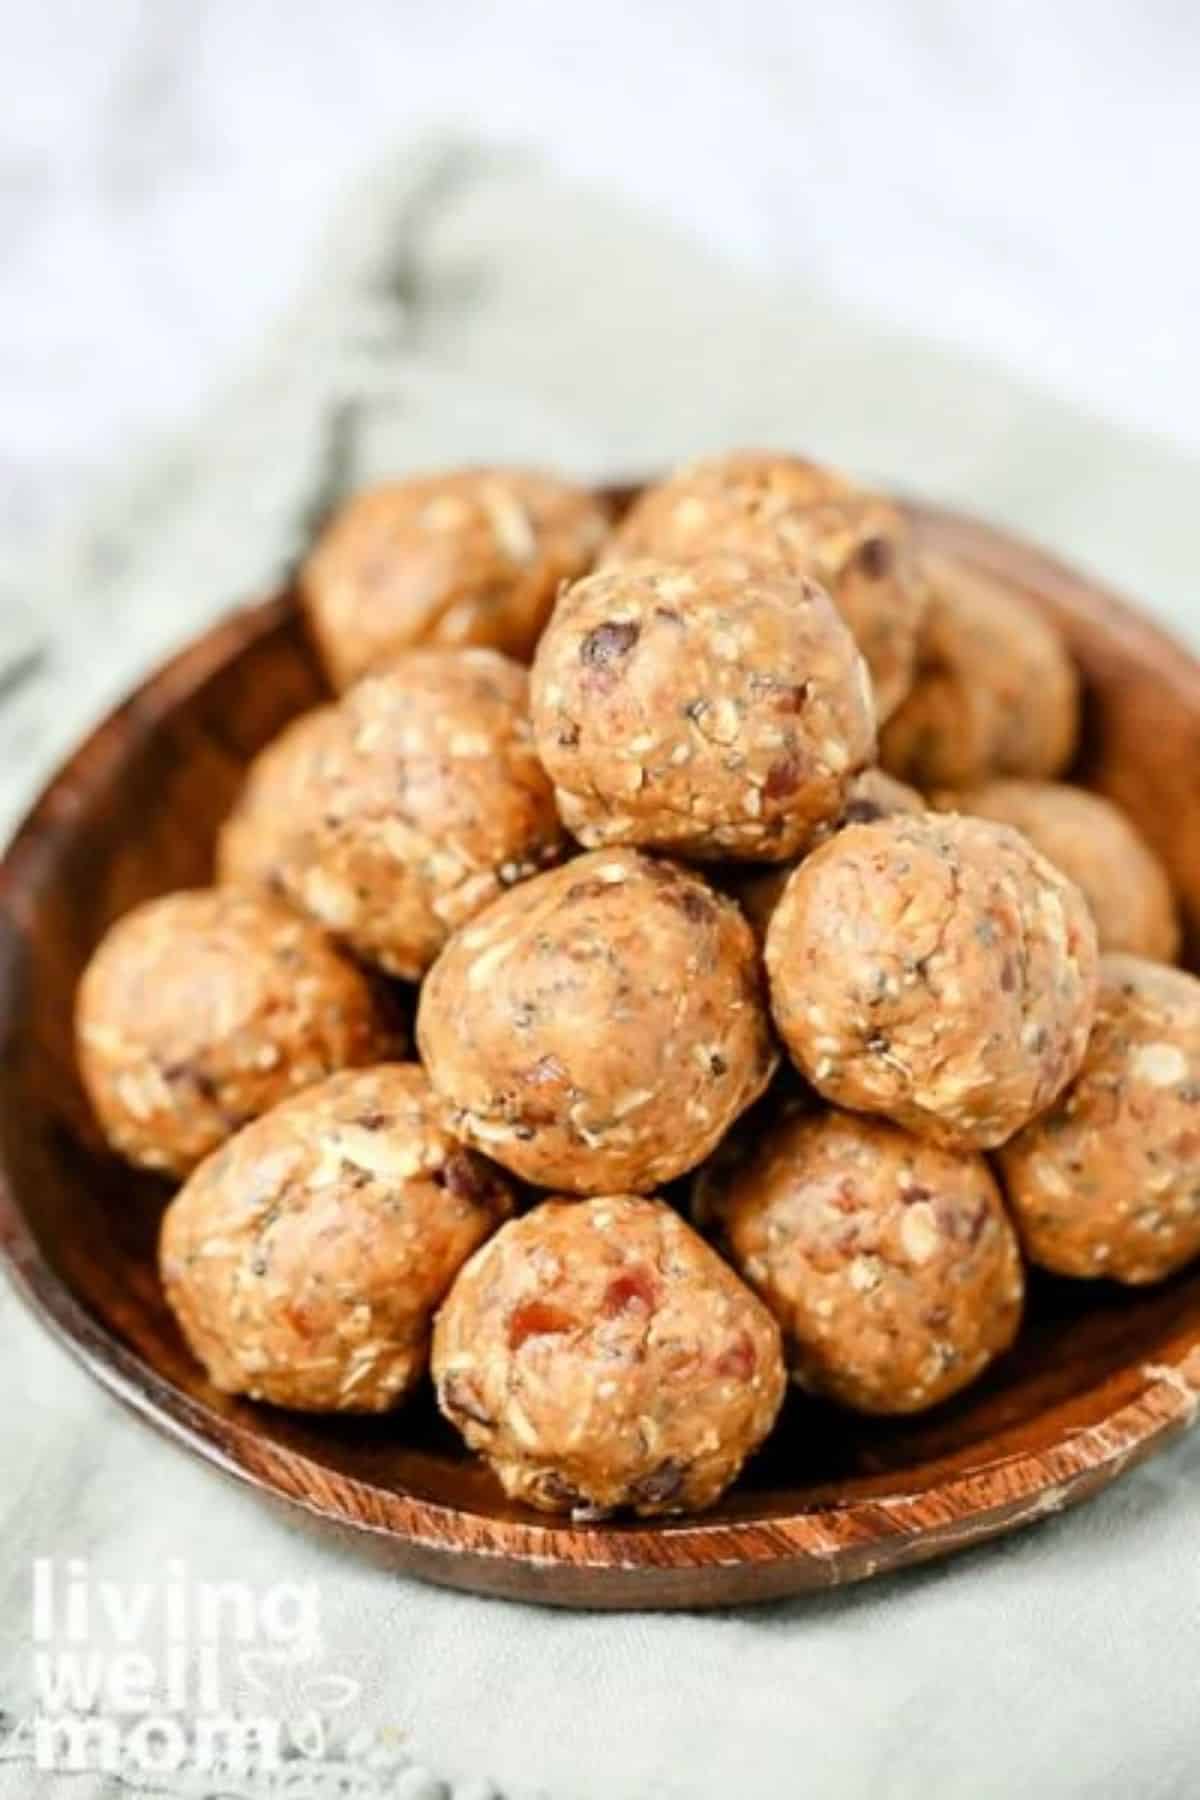 Peanut Butter Date Energy Balls in a wooden bowl.